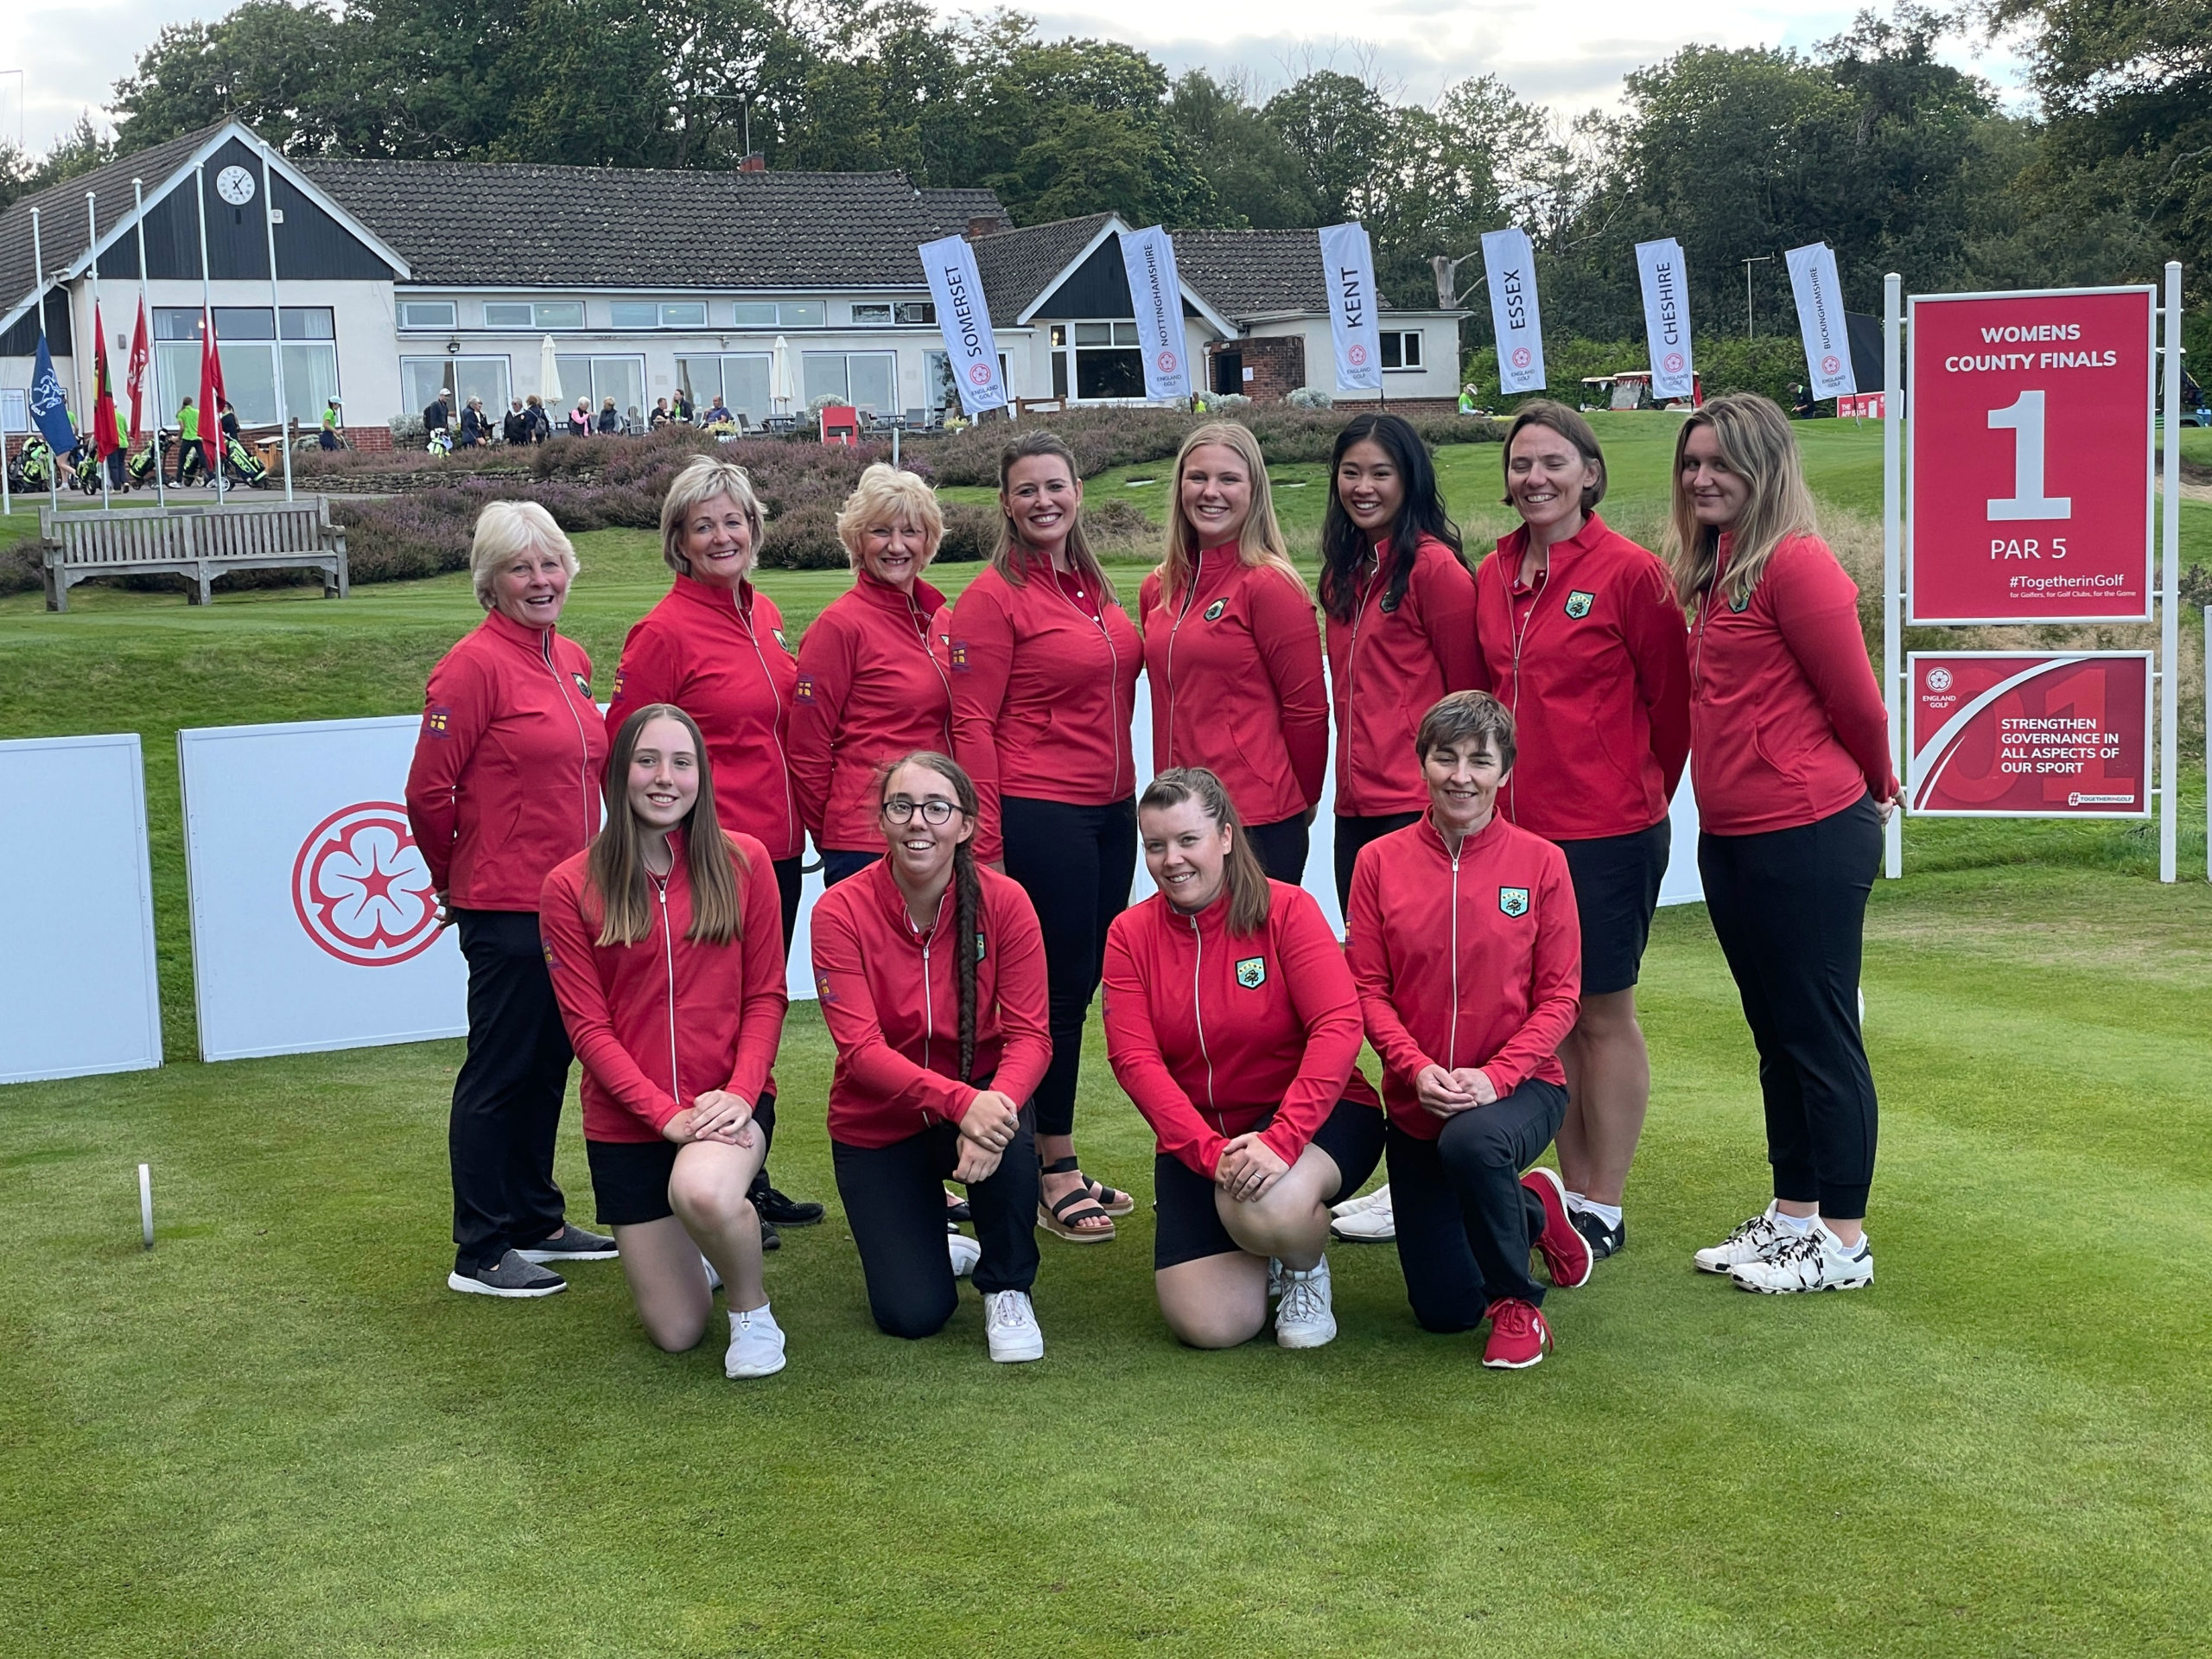 an image of the Notts county ladies golf team 2022